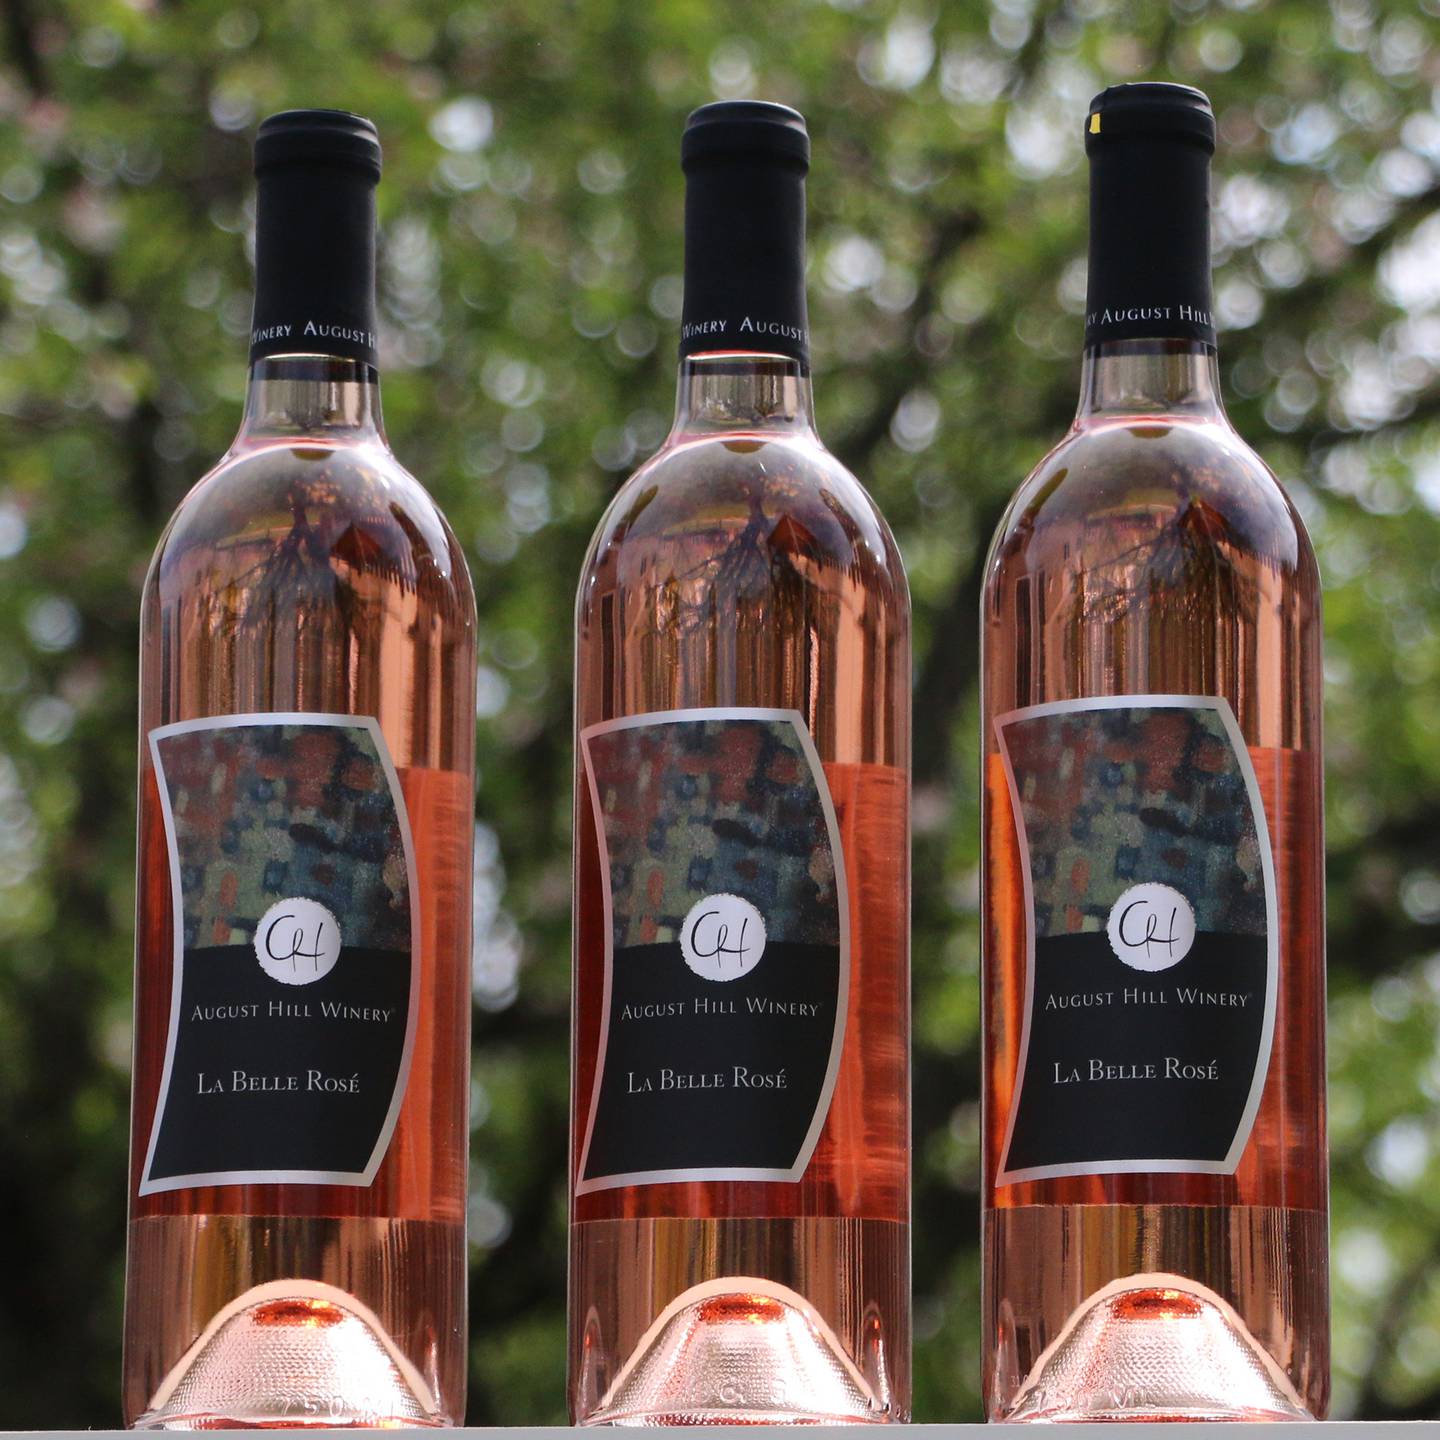 La Belle Rosé also won a gold medal at the 2022 Experience Rosé Wine Competition, in California. This wine is a light-bodied, dry rosé wine with notes of peach, watermelon, and white rose petals, and is made with grapes from Spring Valley Vineyard in Pulaski, Illinois.